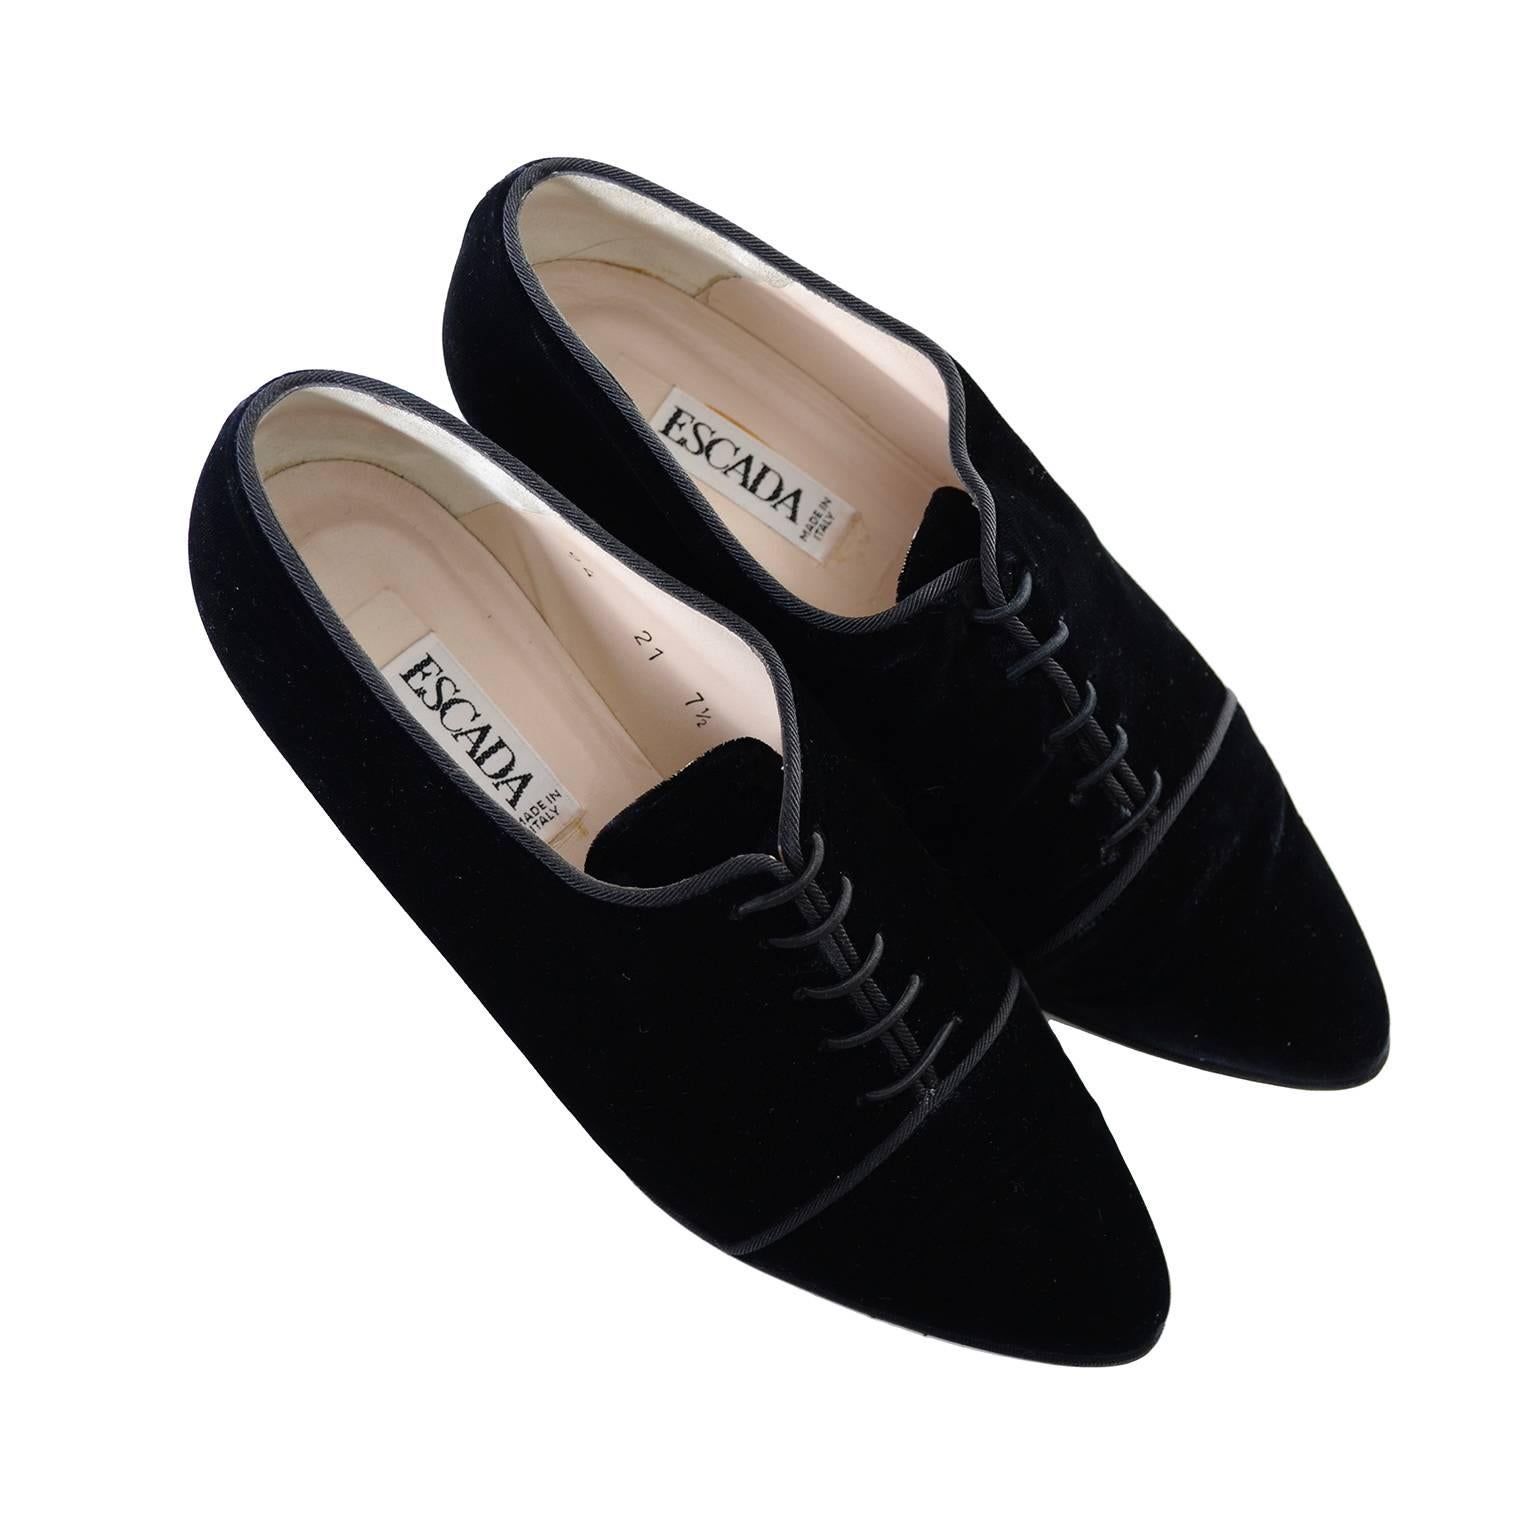 I love these vintage black velvet shoes from Escada!  These jazz style shoes have a pointed toe, 2 and 1/4" heel and decorative laces. The velvet is trimmed in black satin and other than minor sole scuffing, the shoes are in excellent